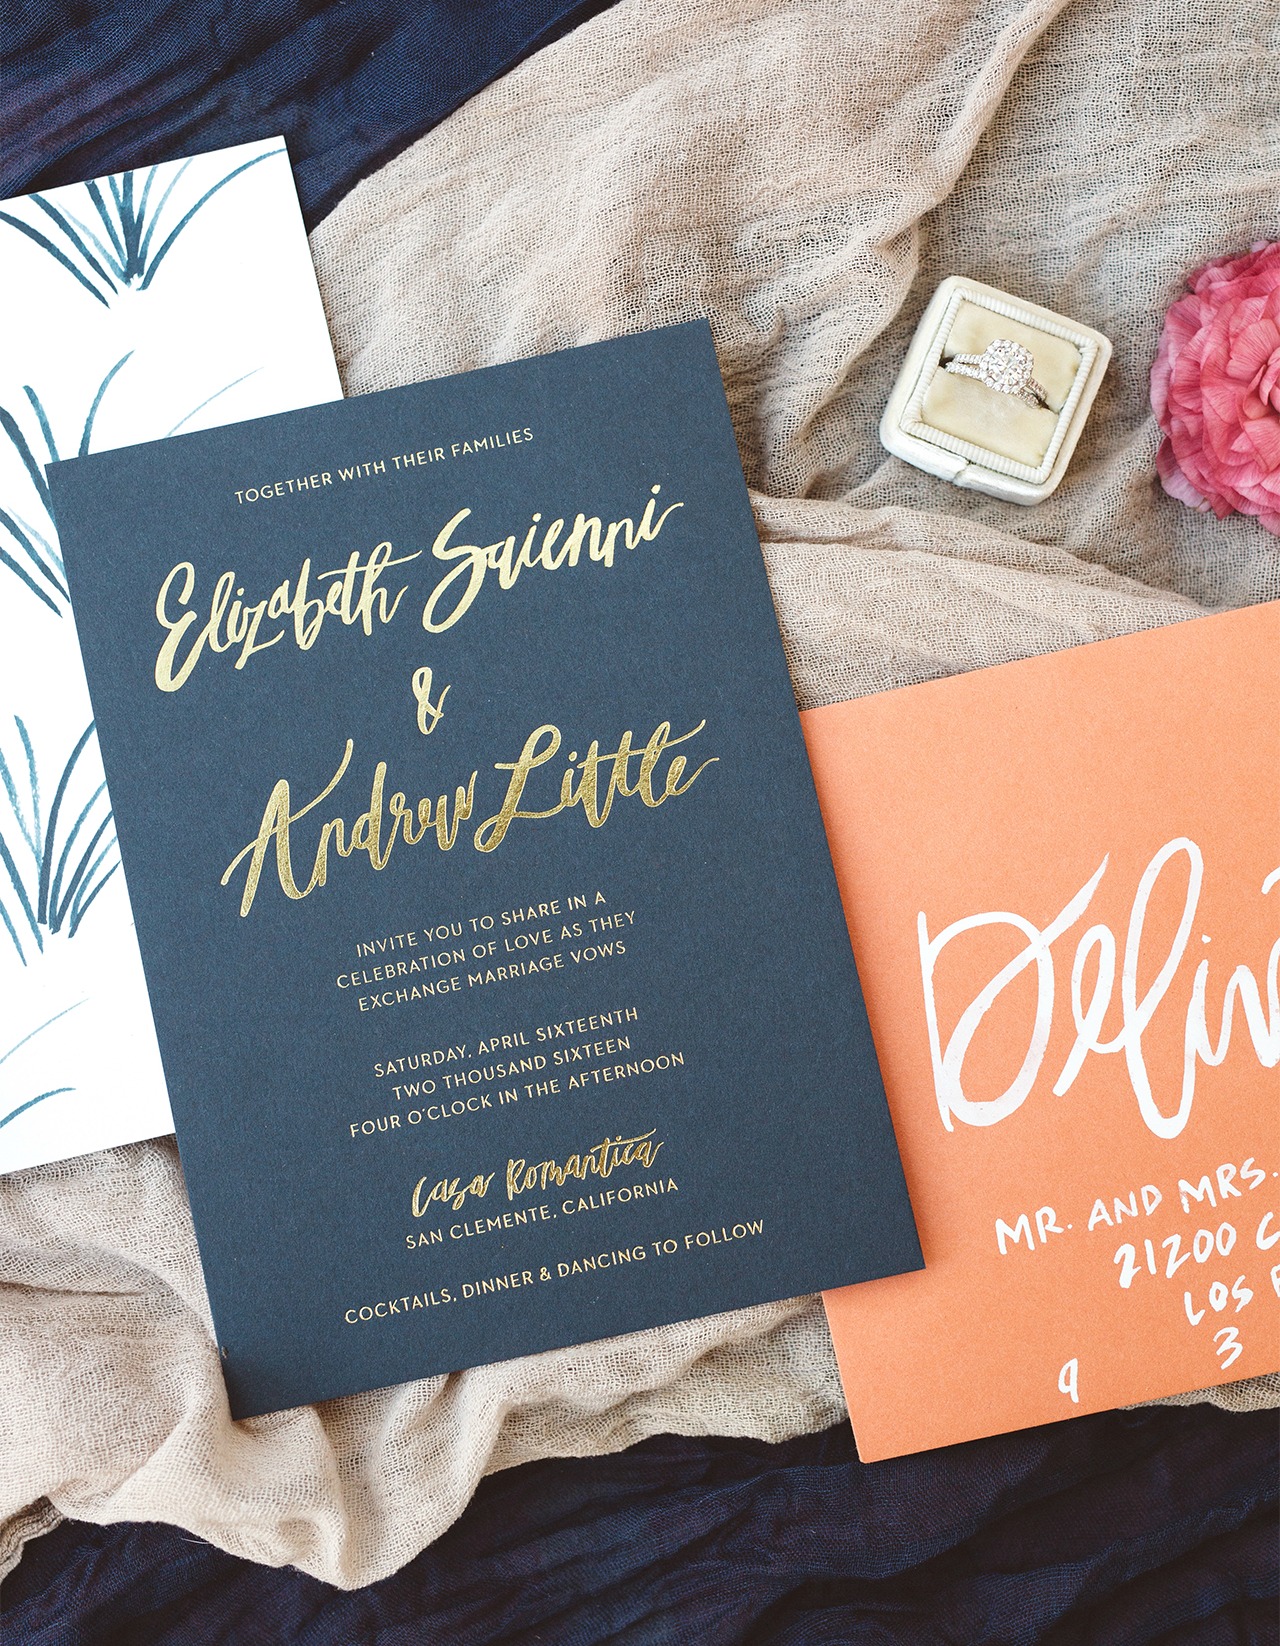 Elegant and semi-formal beach-inspired brush lettered gold and navy wedding invitations with coral envelopes by Goodheart Design and Czar Press